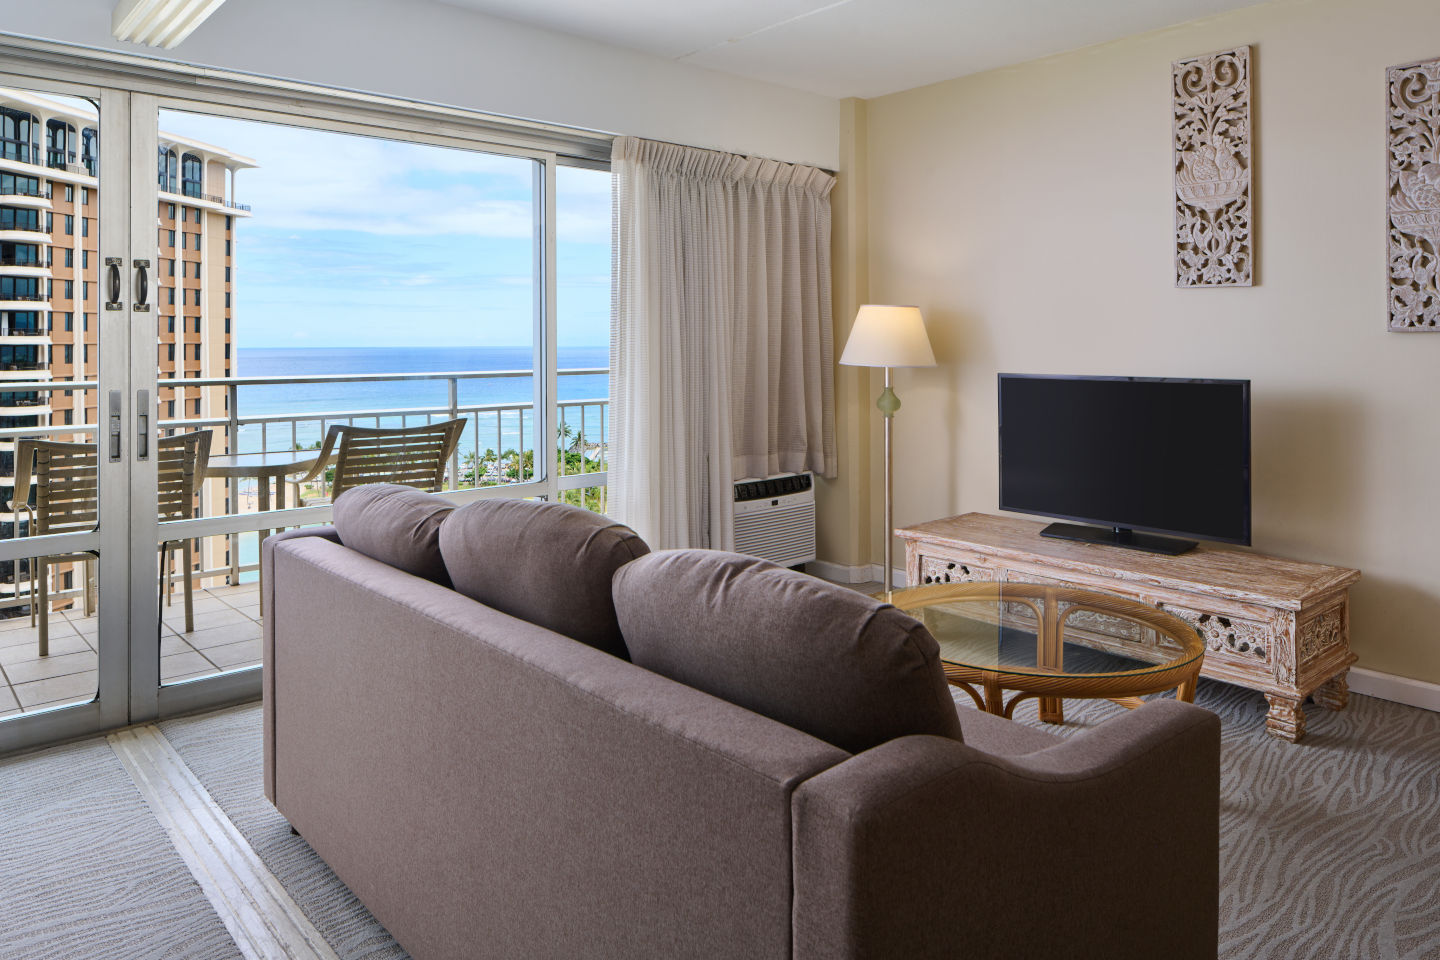 Ocean View Jr Suite with Full Kitchen and separate living area with seating and a LCD television, a private balcony with a view